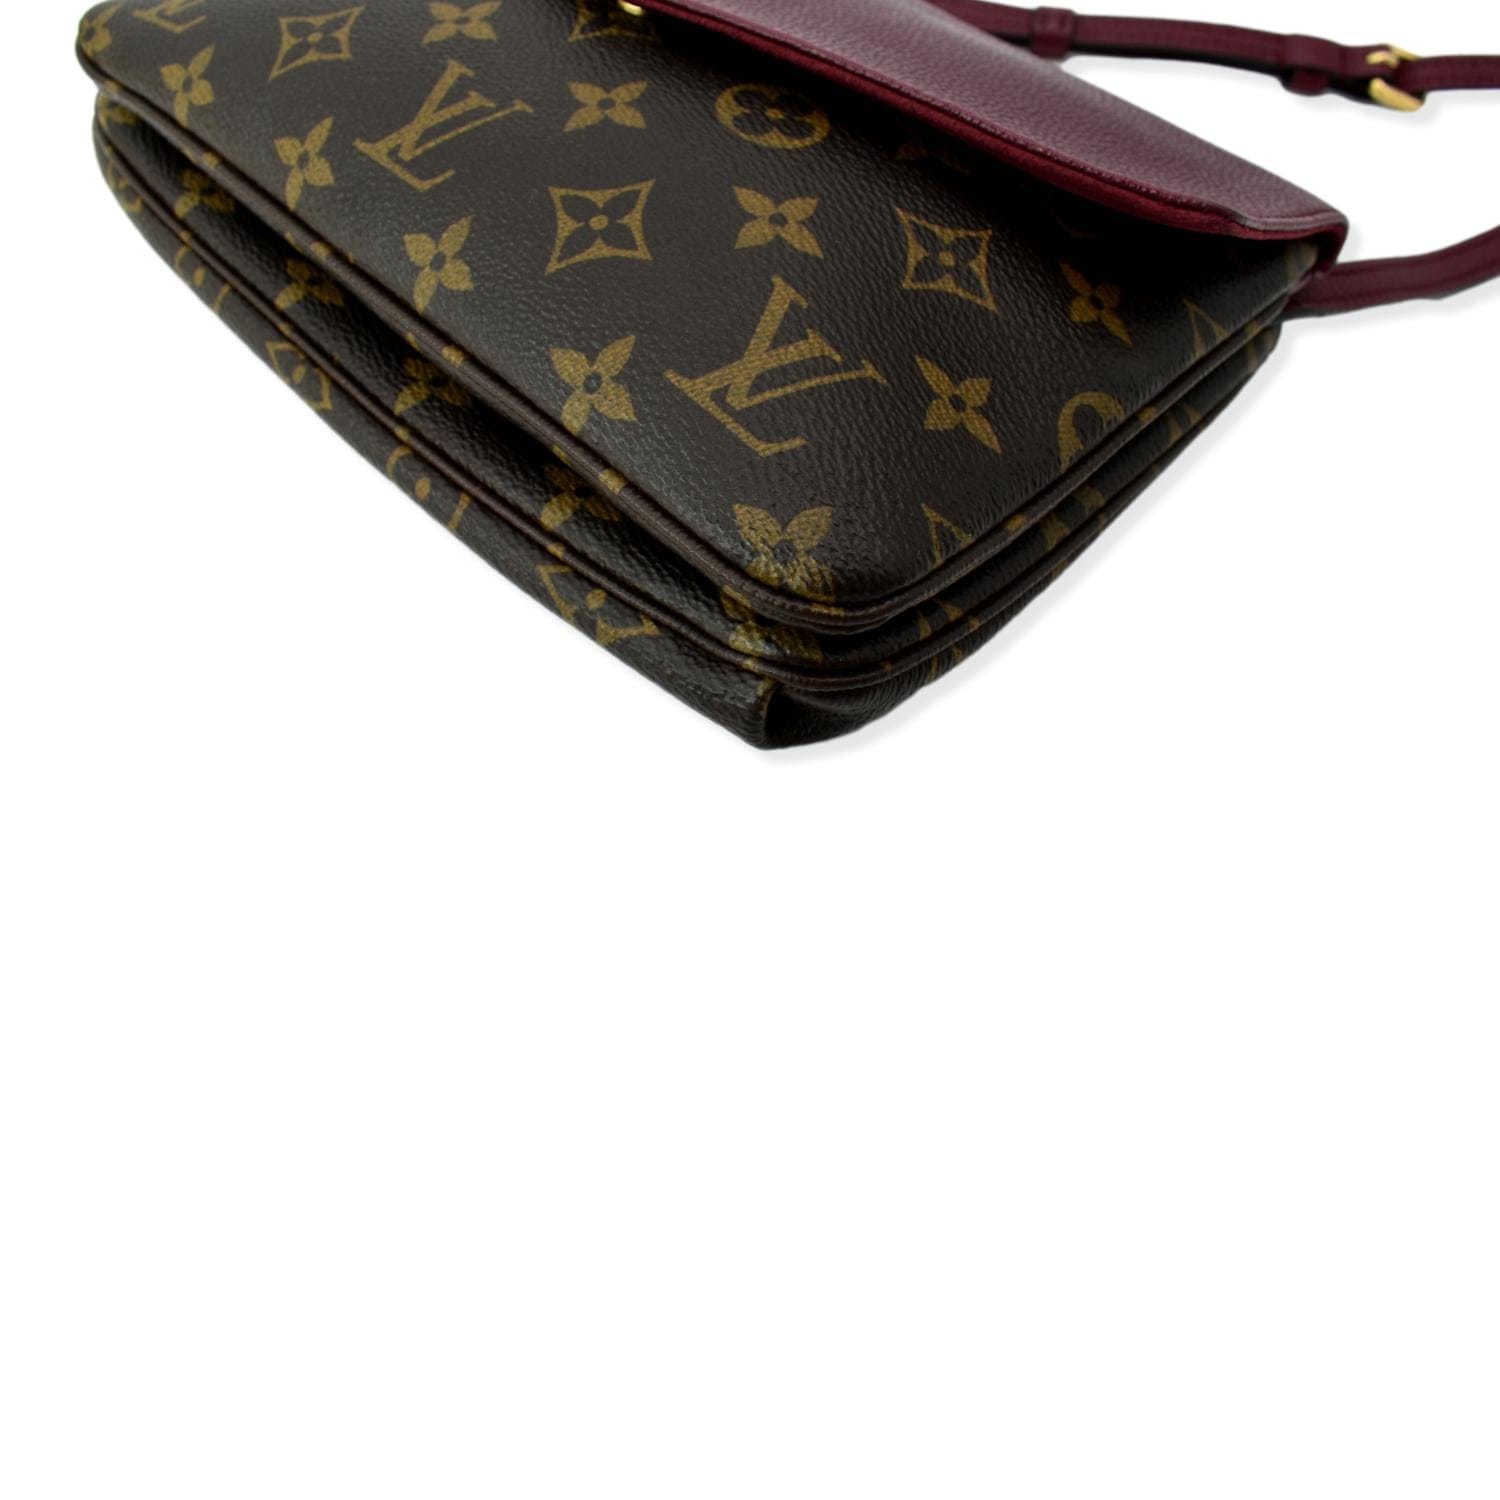 Vuitton Twice - 7 For Sale on 1stDibs